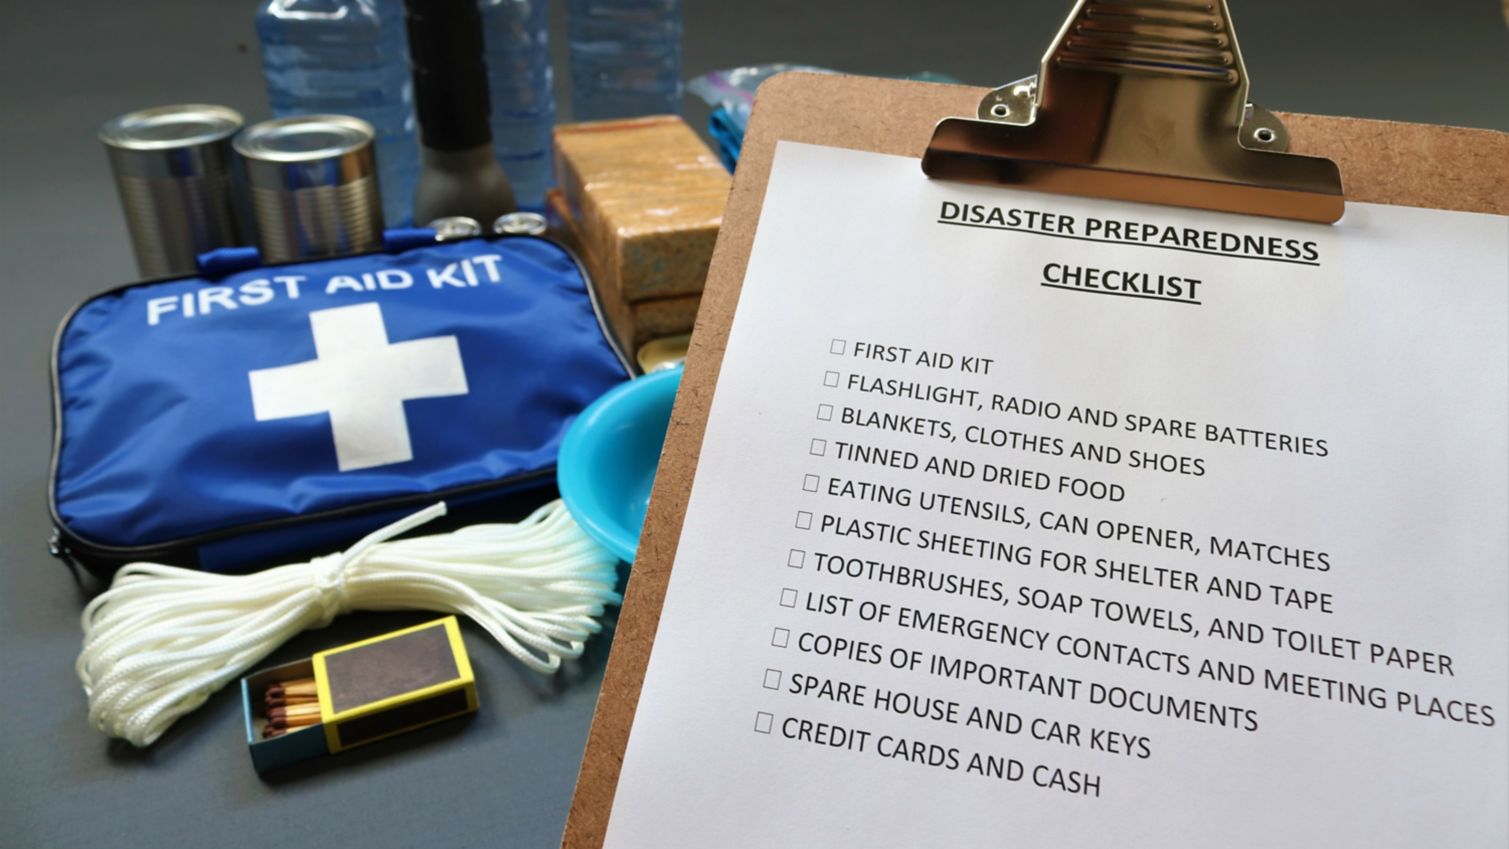 A disaster preparedness checklist and first aid kit sit on a table.